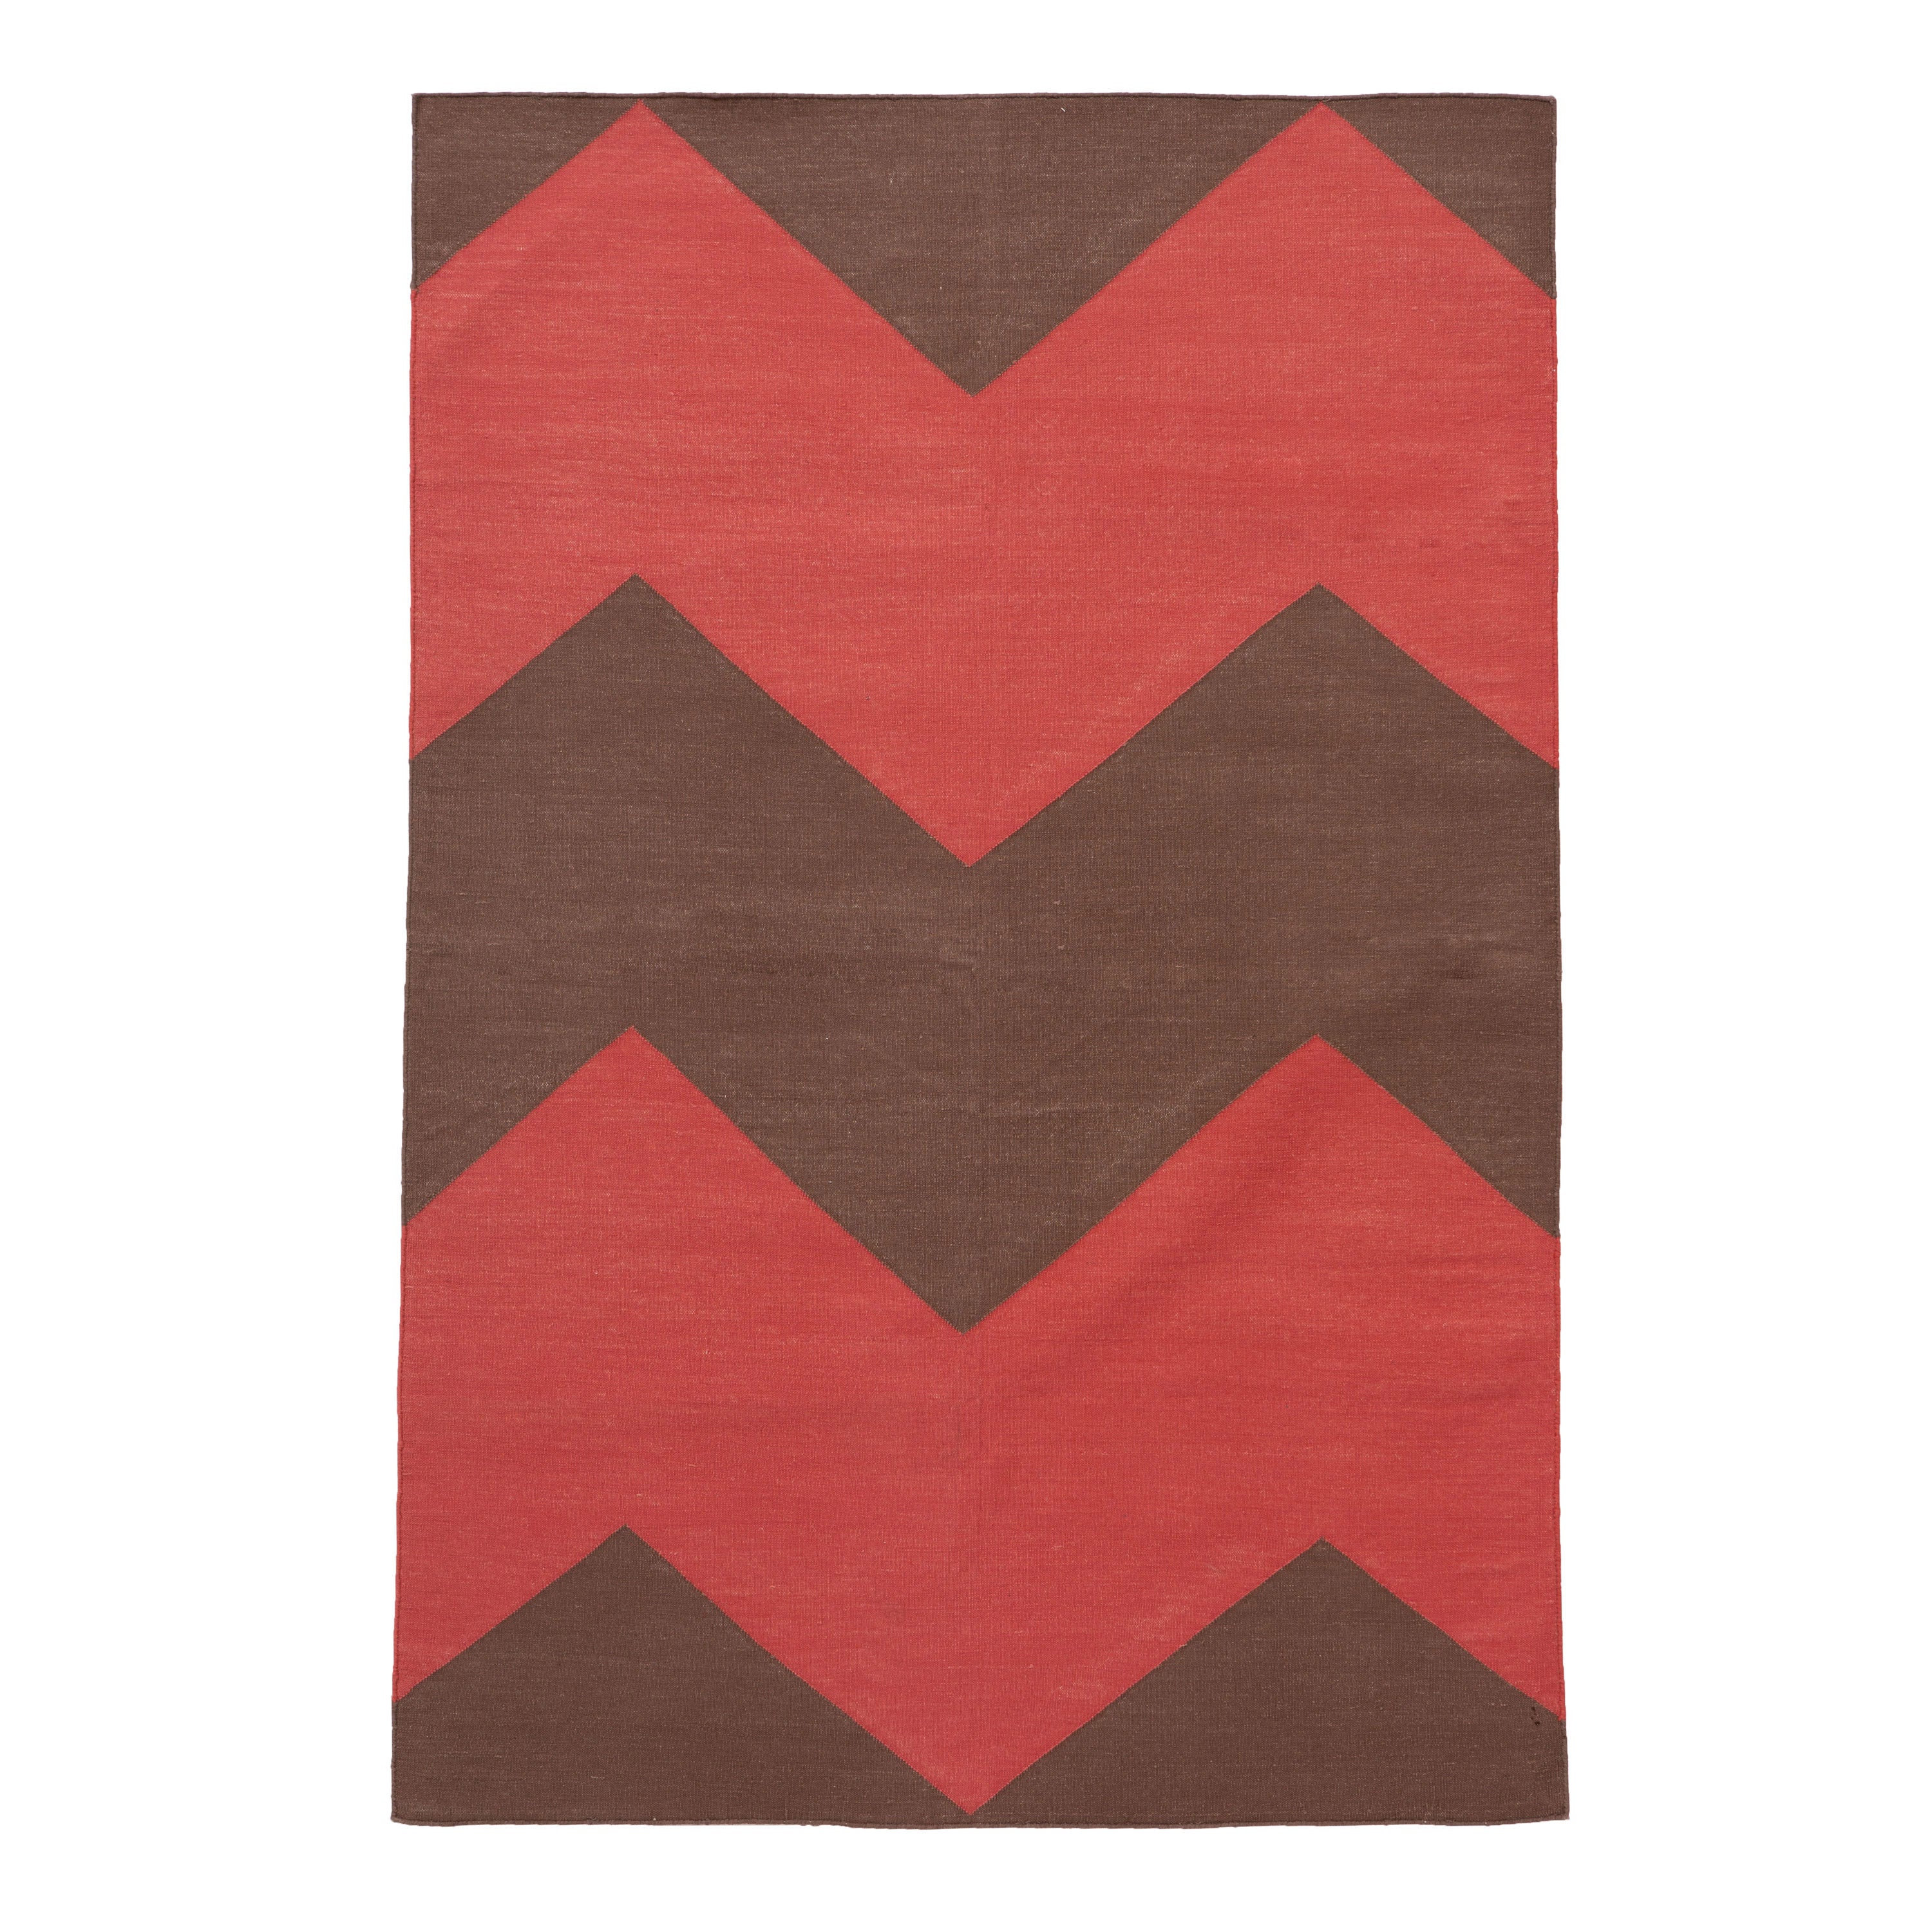 Red and Brown Chevron Flatweave Cotton Rug - 3'6" x 5'6"